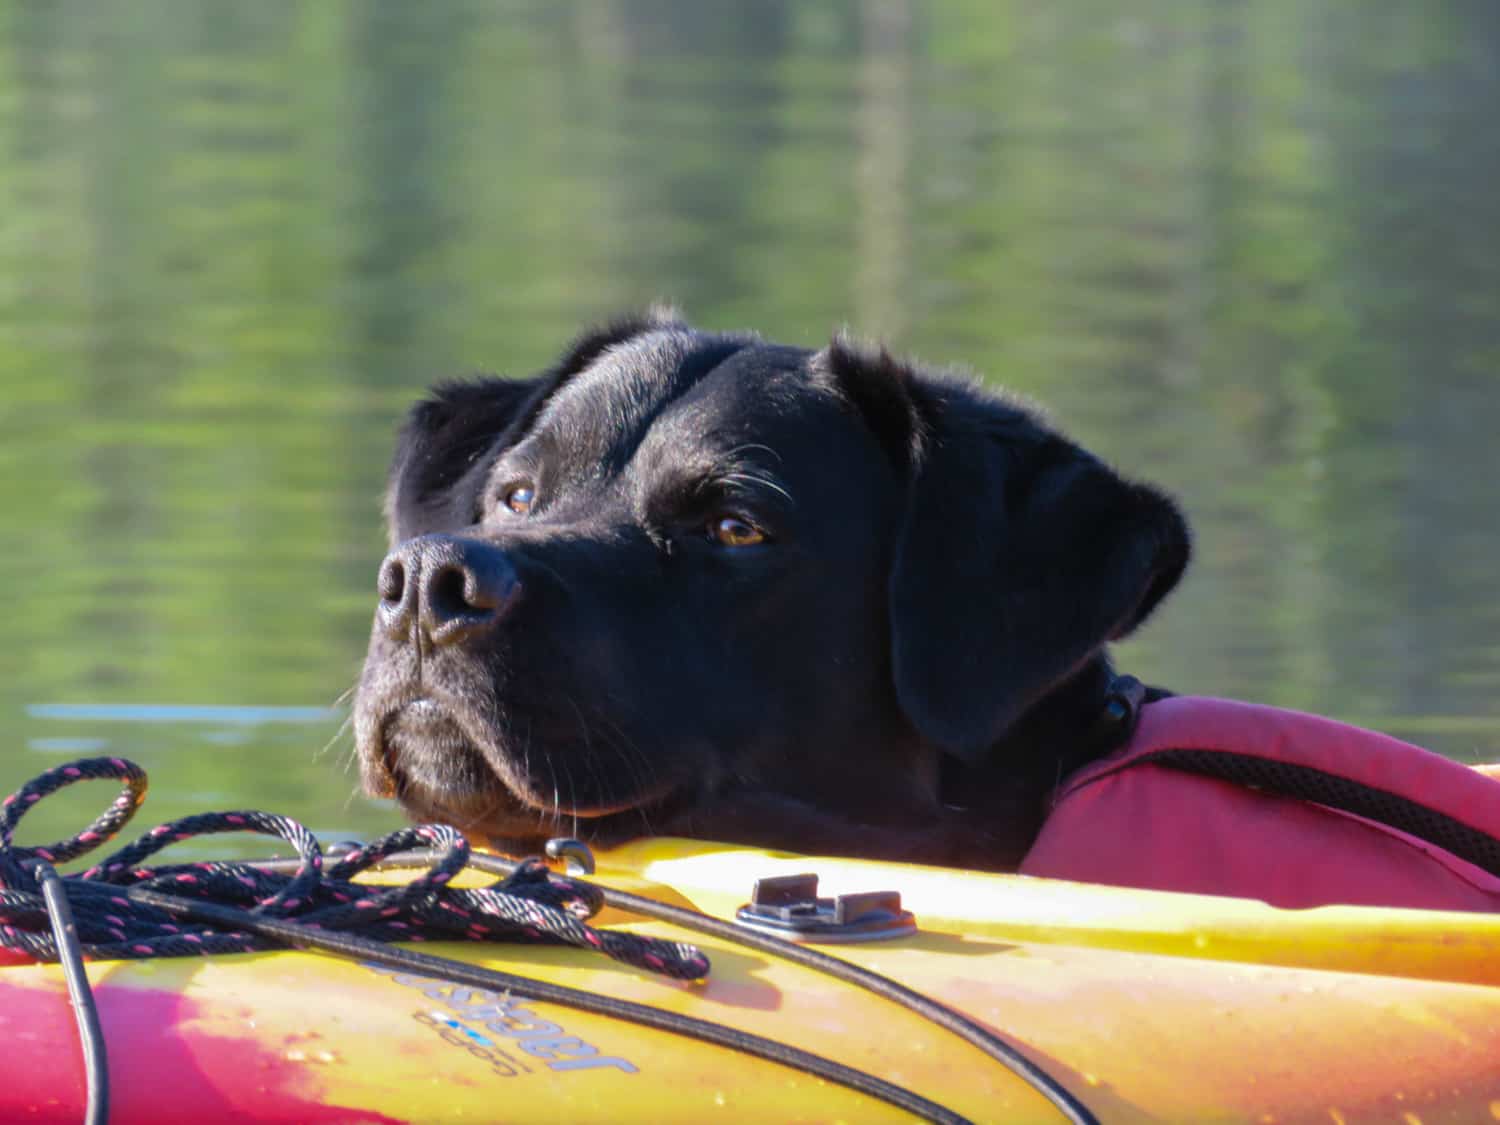 Tips for Canoeing or Kayaking with Dogs - Plan a Safe and Fun